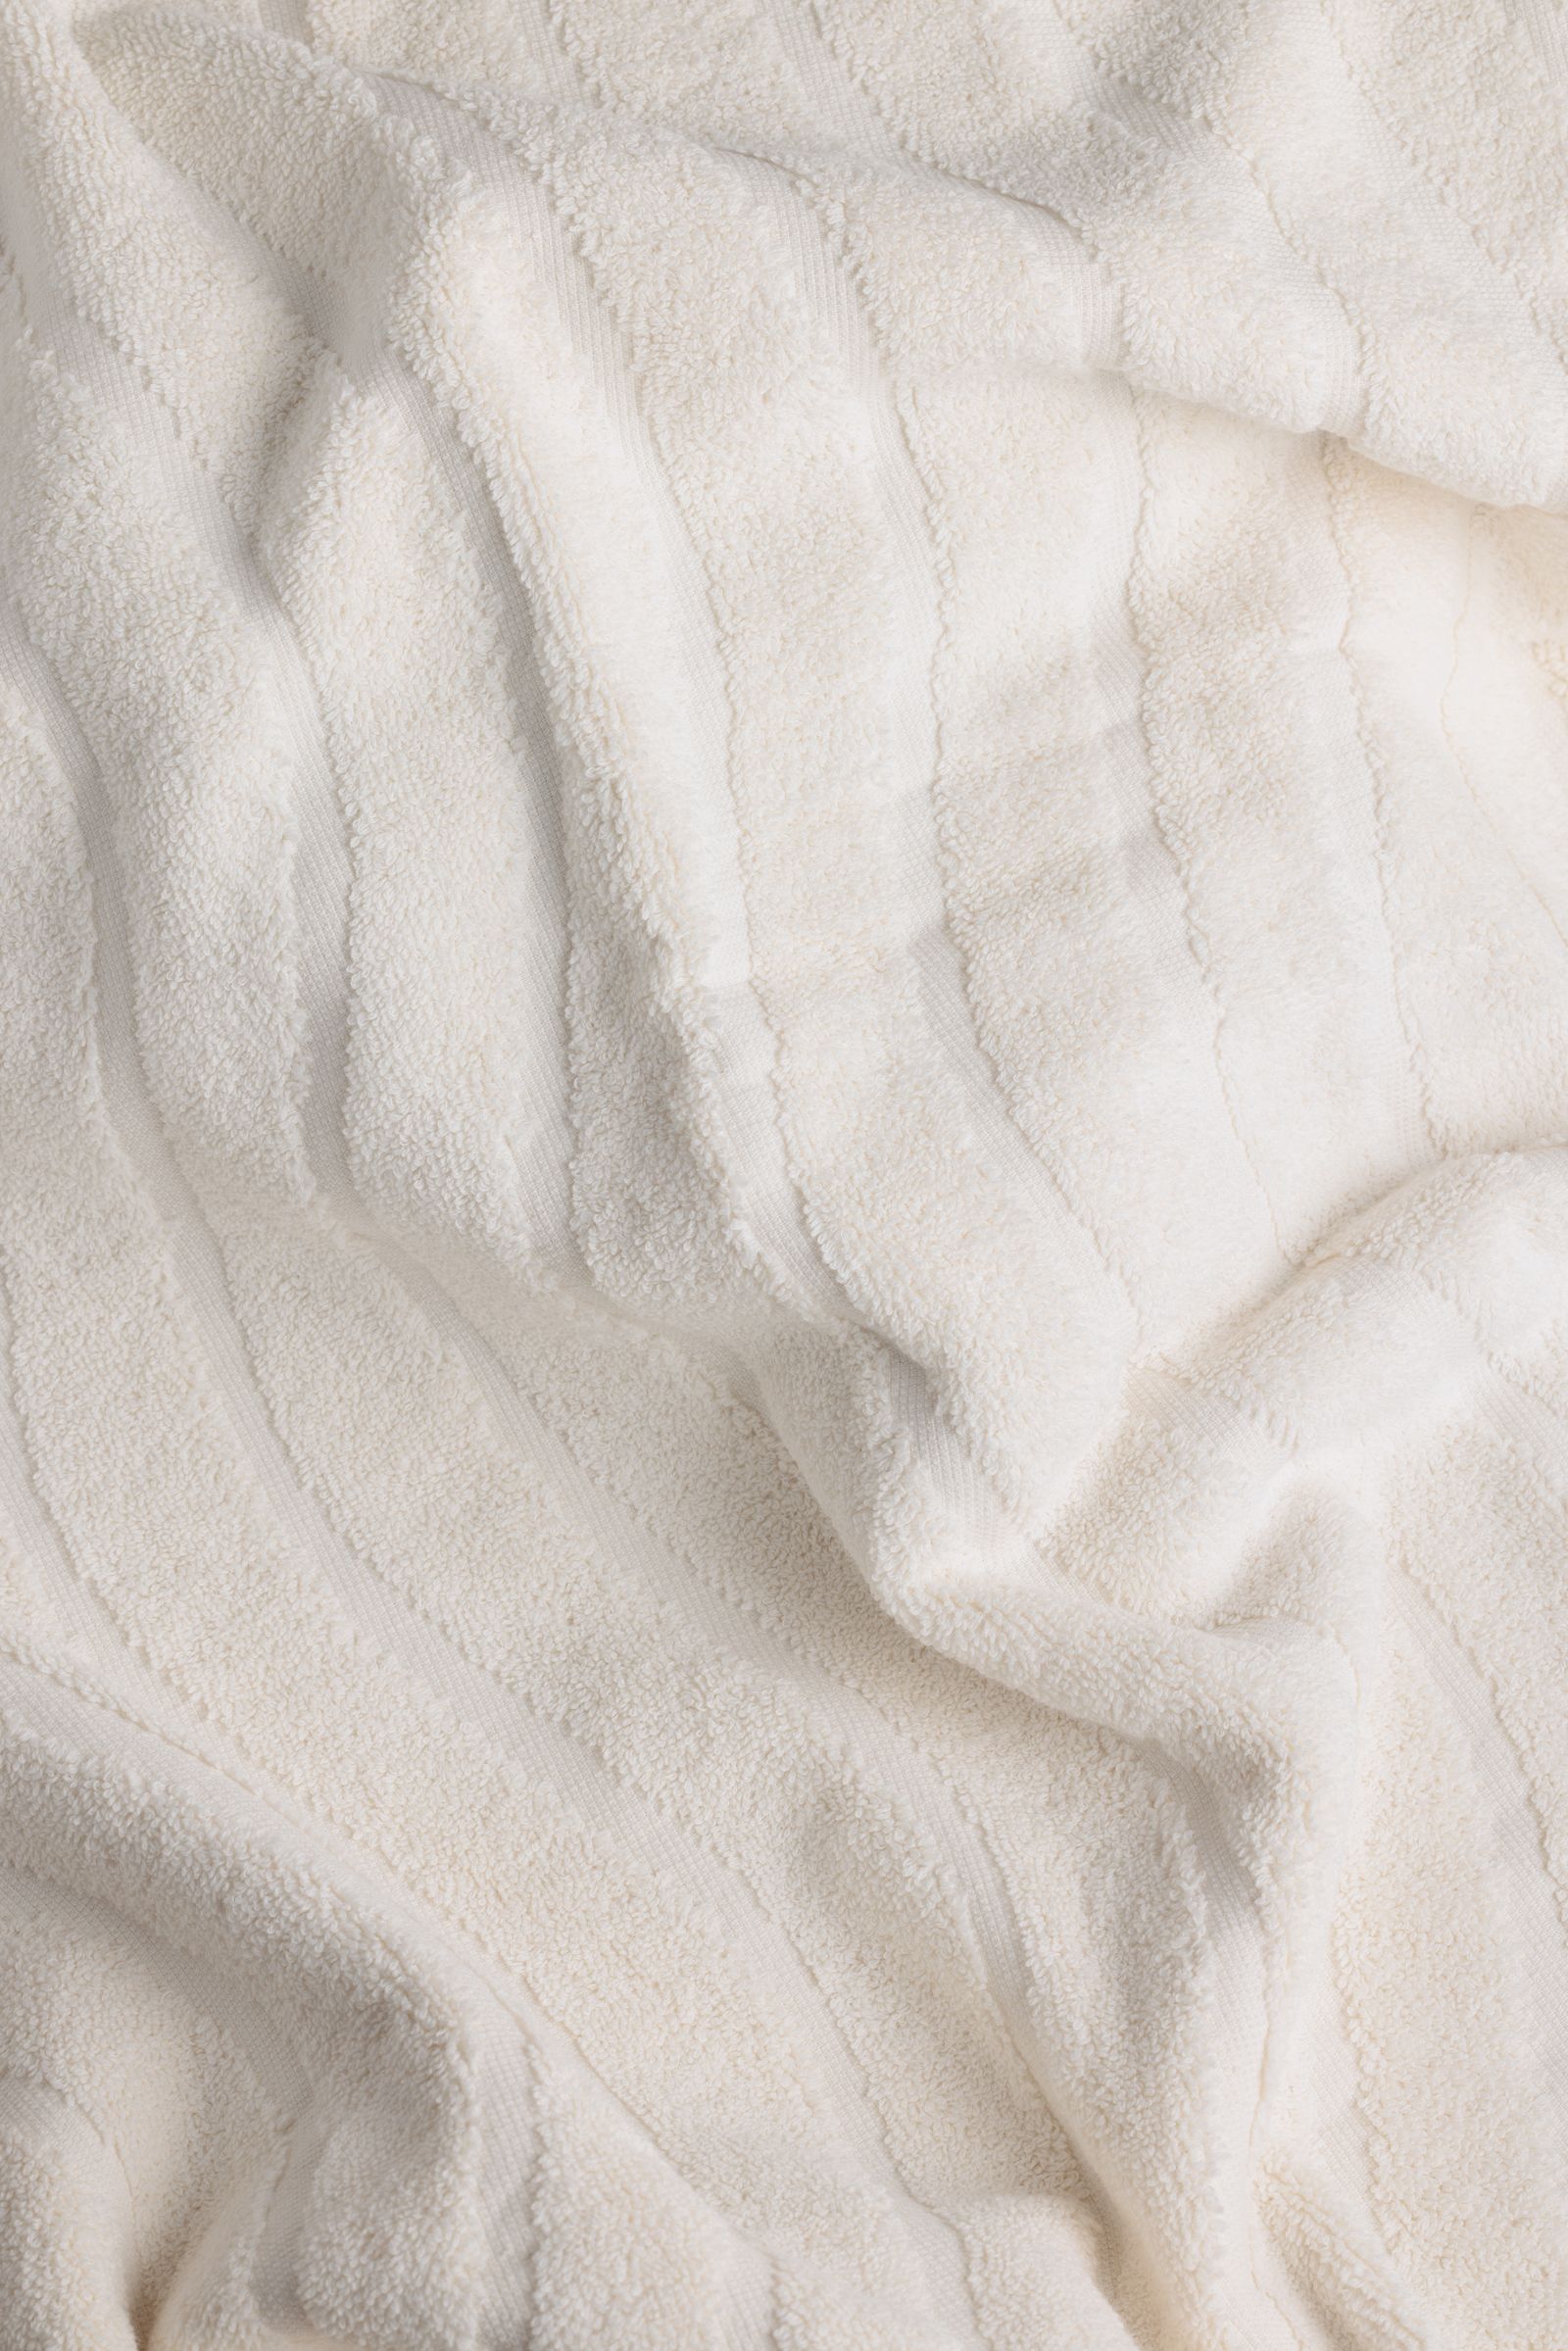 Shop BAINA | ST CLAIR for | Join off* BAINA Official | · Organic Bath Online Store Towel | 15% Cotton Ivory